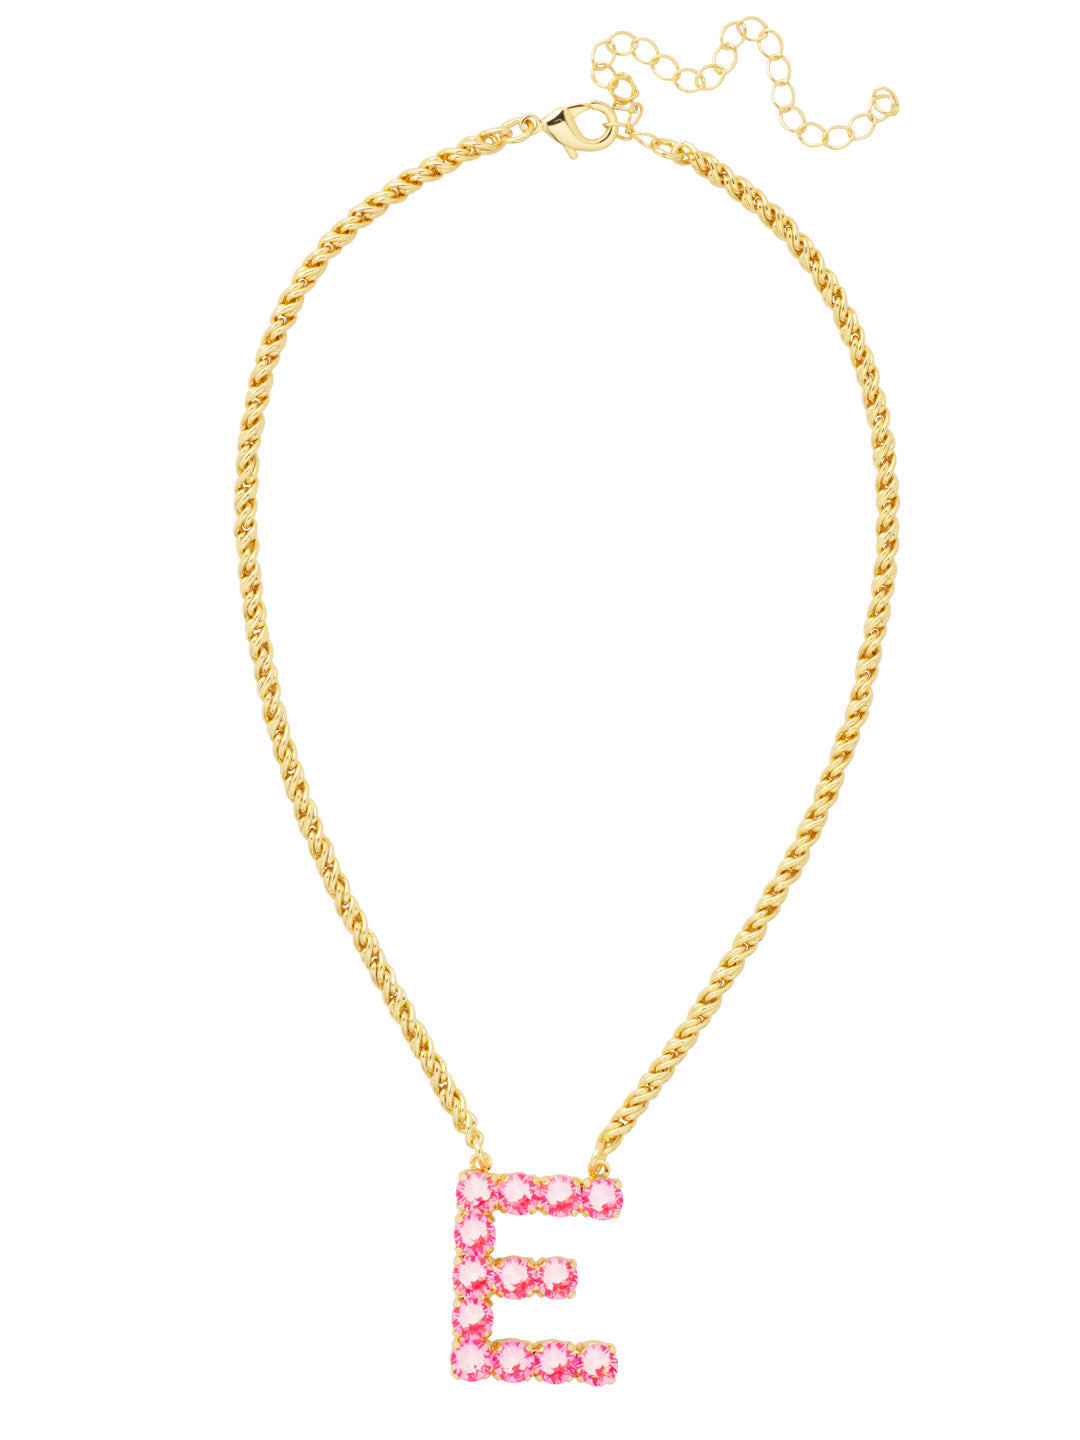 E Initial Rope Pendant Necklace - NFK24BGETP